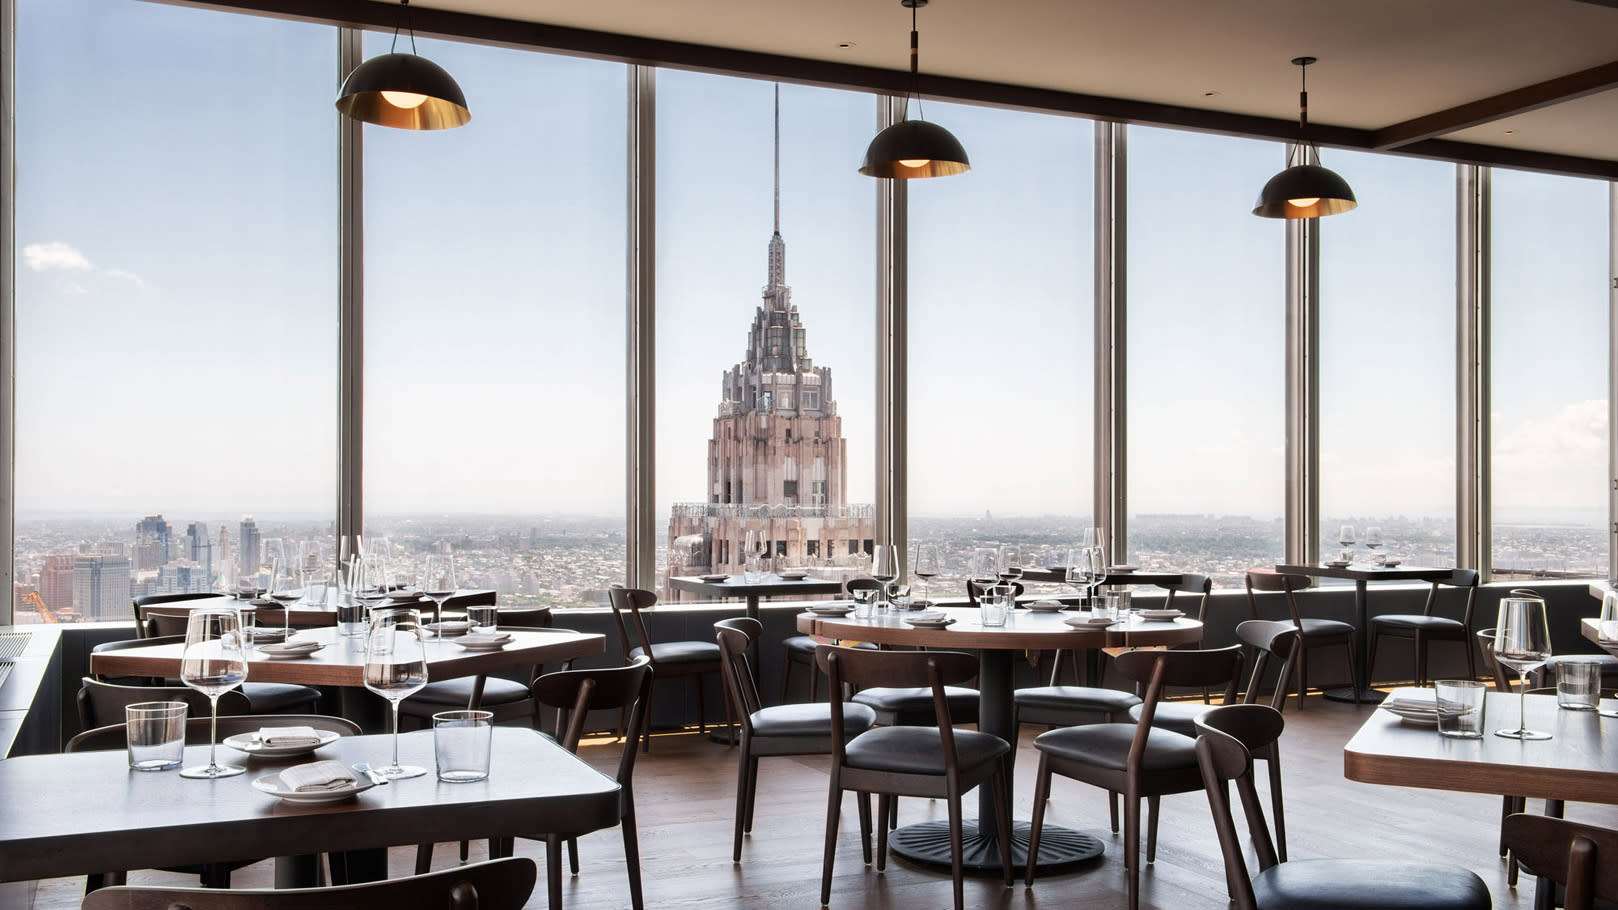 A Restaurant with Stunning Views Only Rivaled by the Food